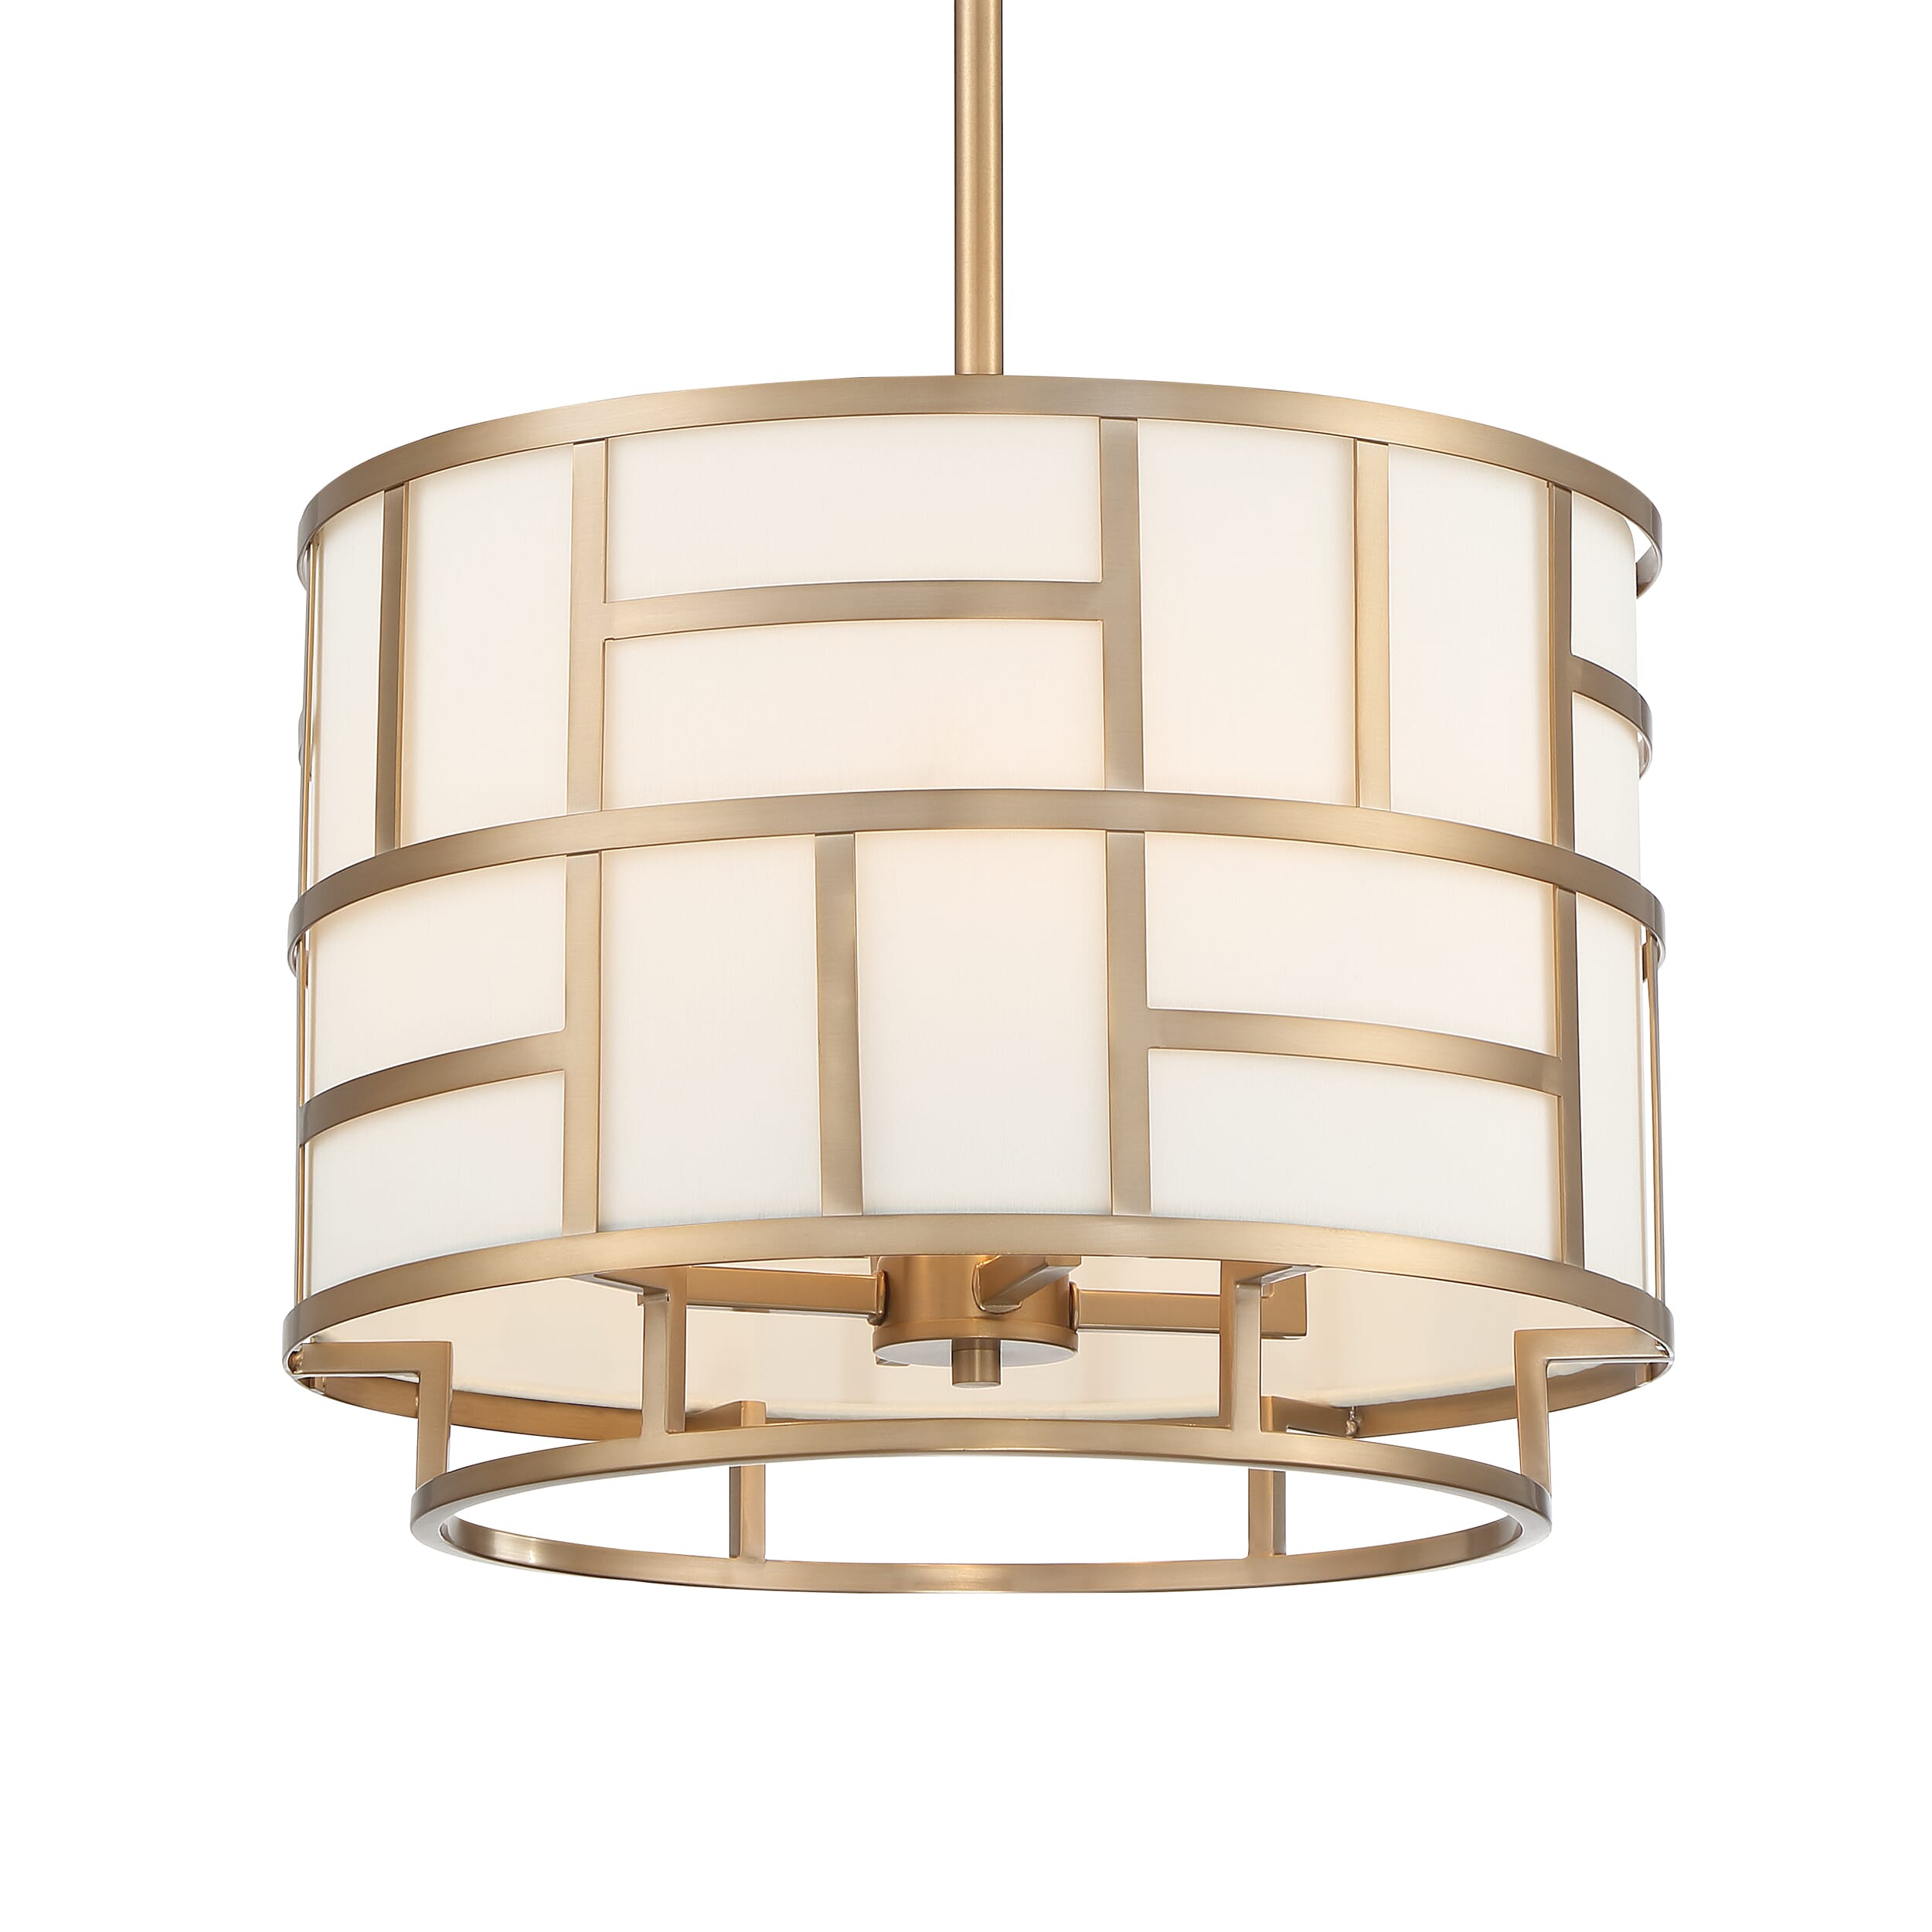 Libby Langdon for Crystorama Danielson 13"" Transitional Chandelier in Vibrant Gold -  DAN-404-VG